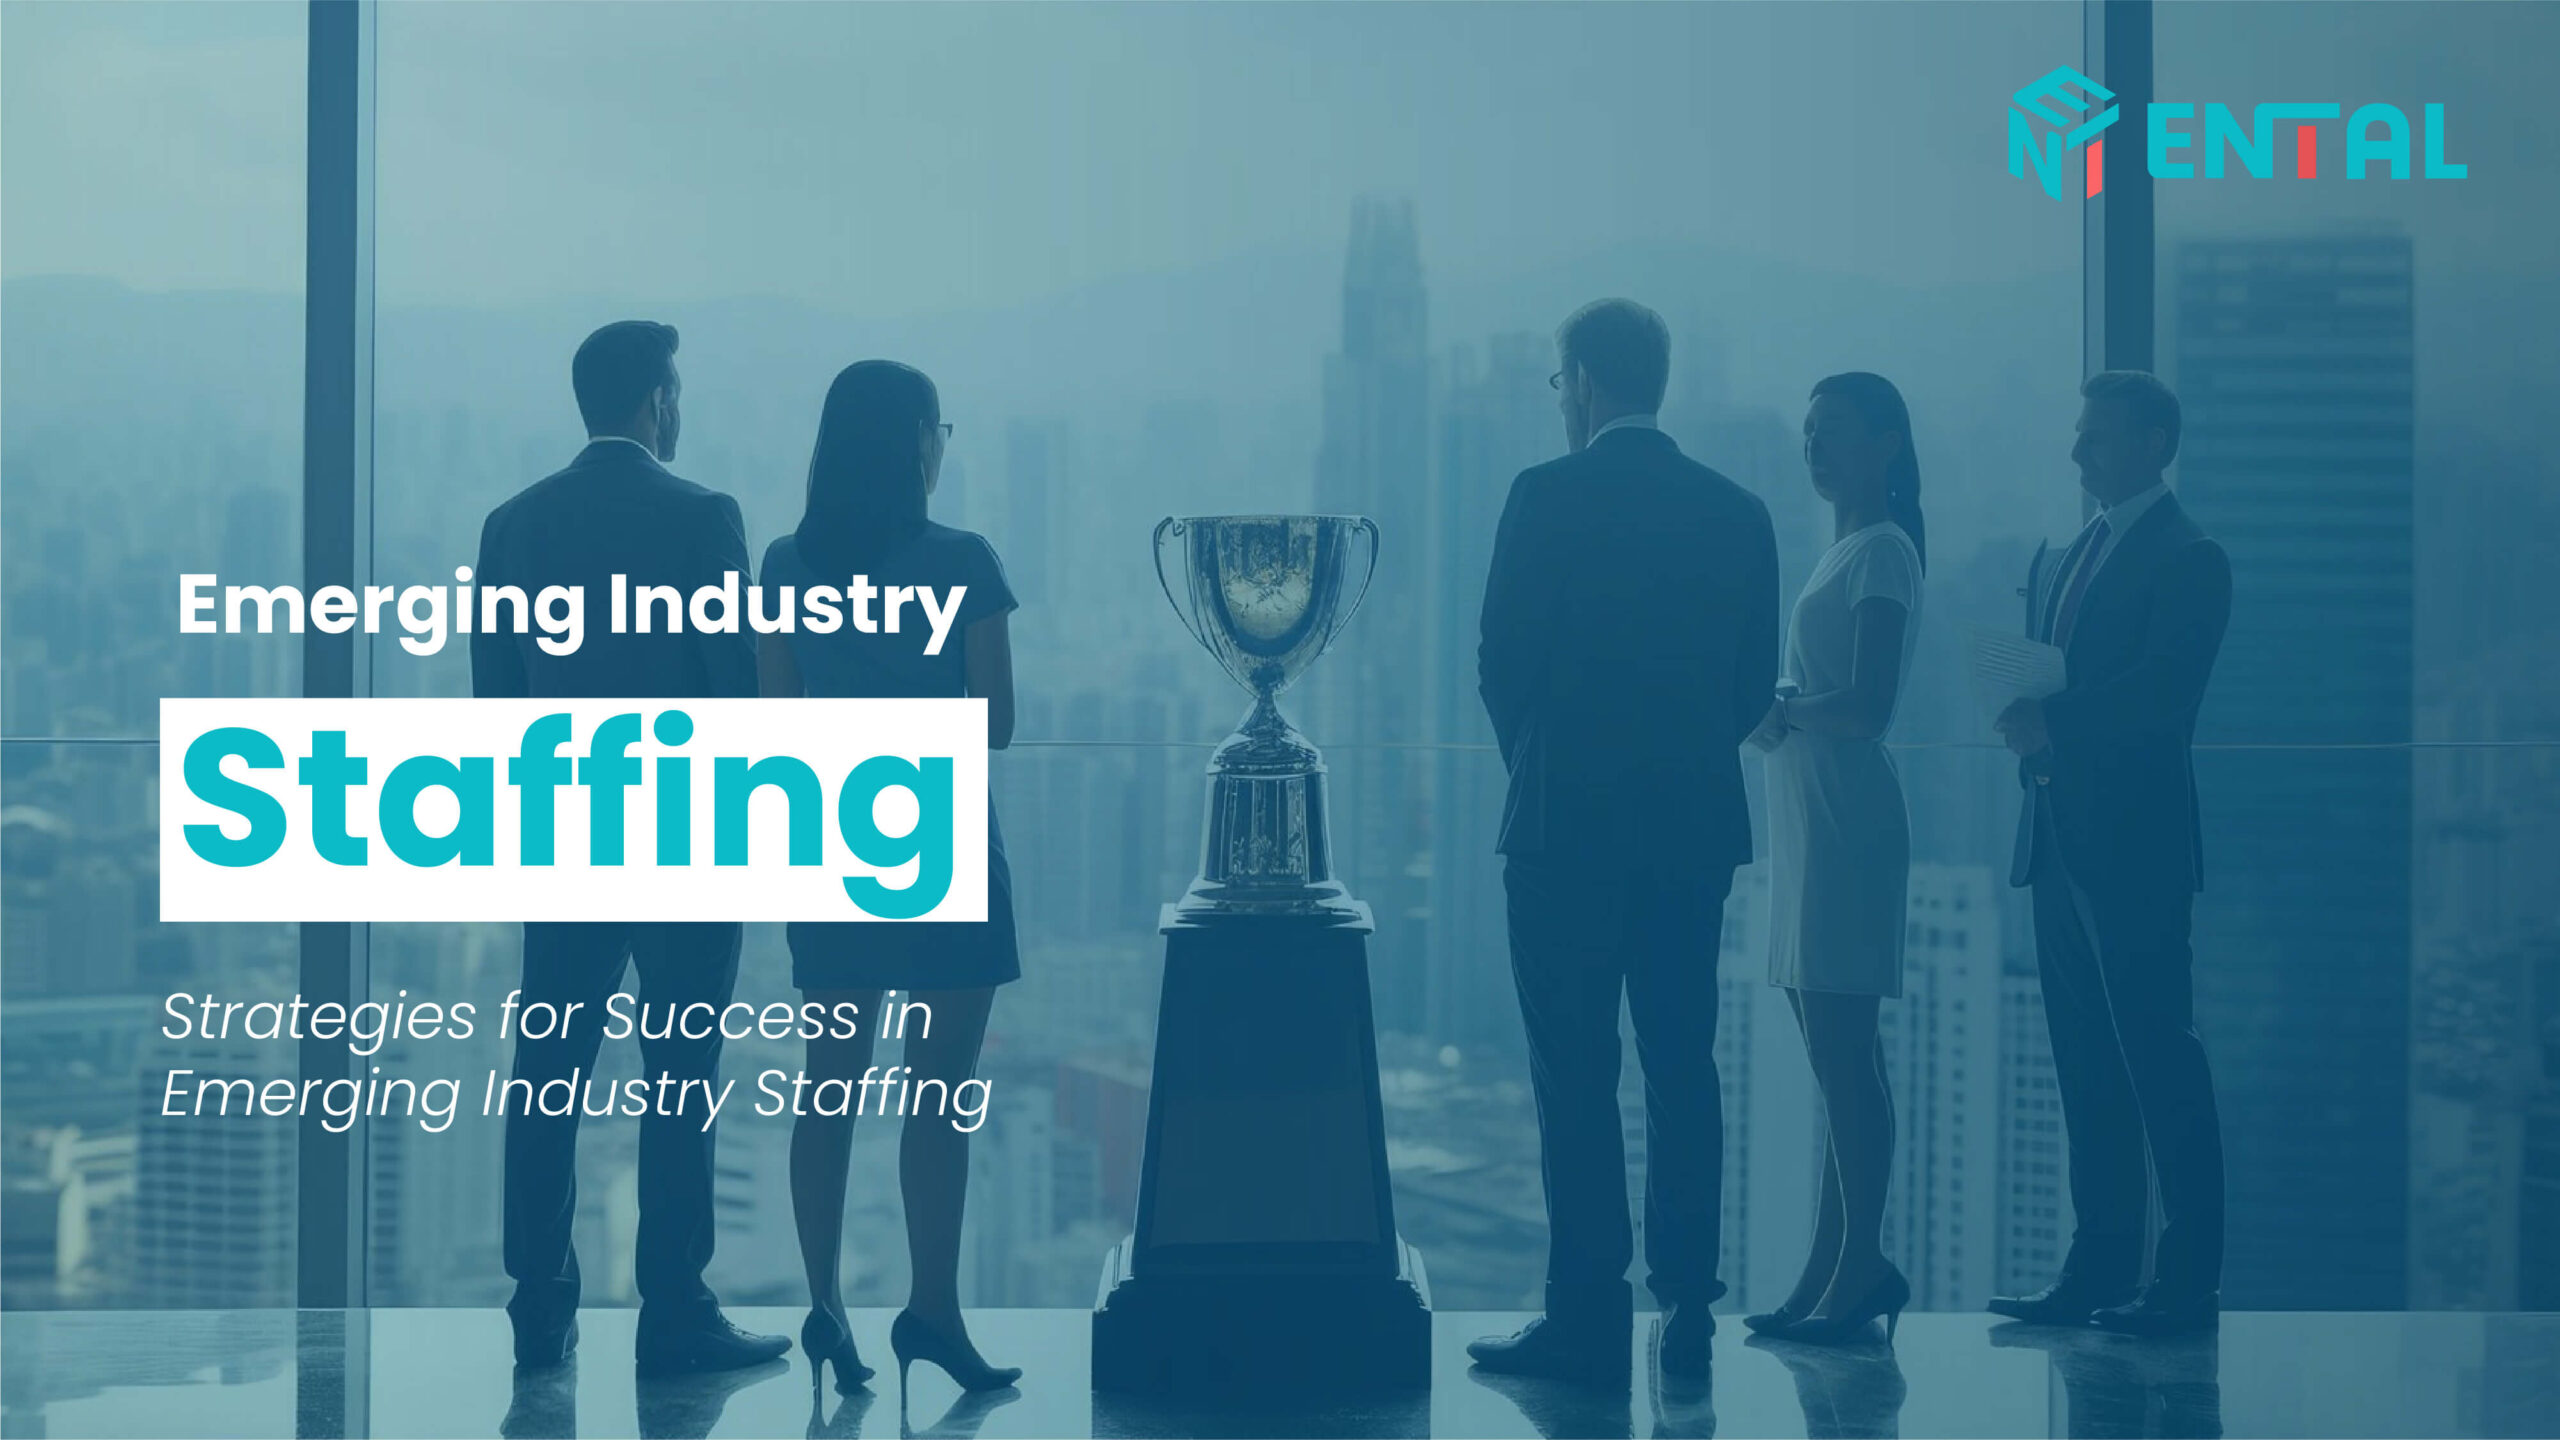 Emerging industry Staffing